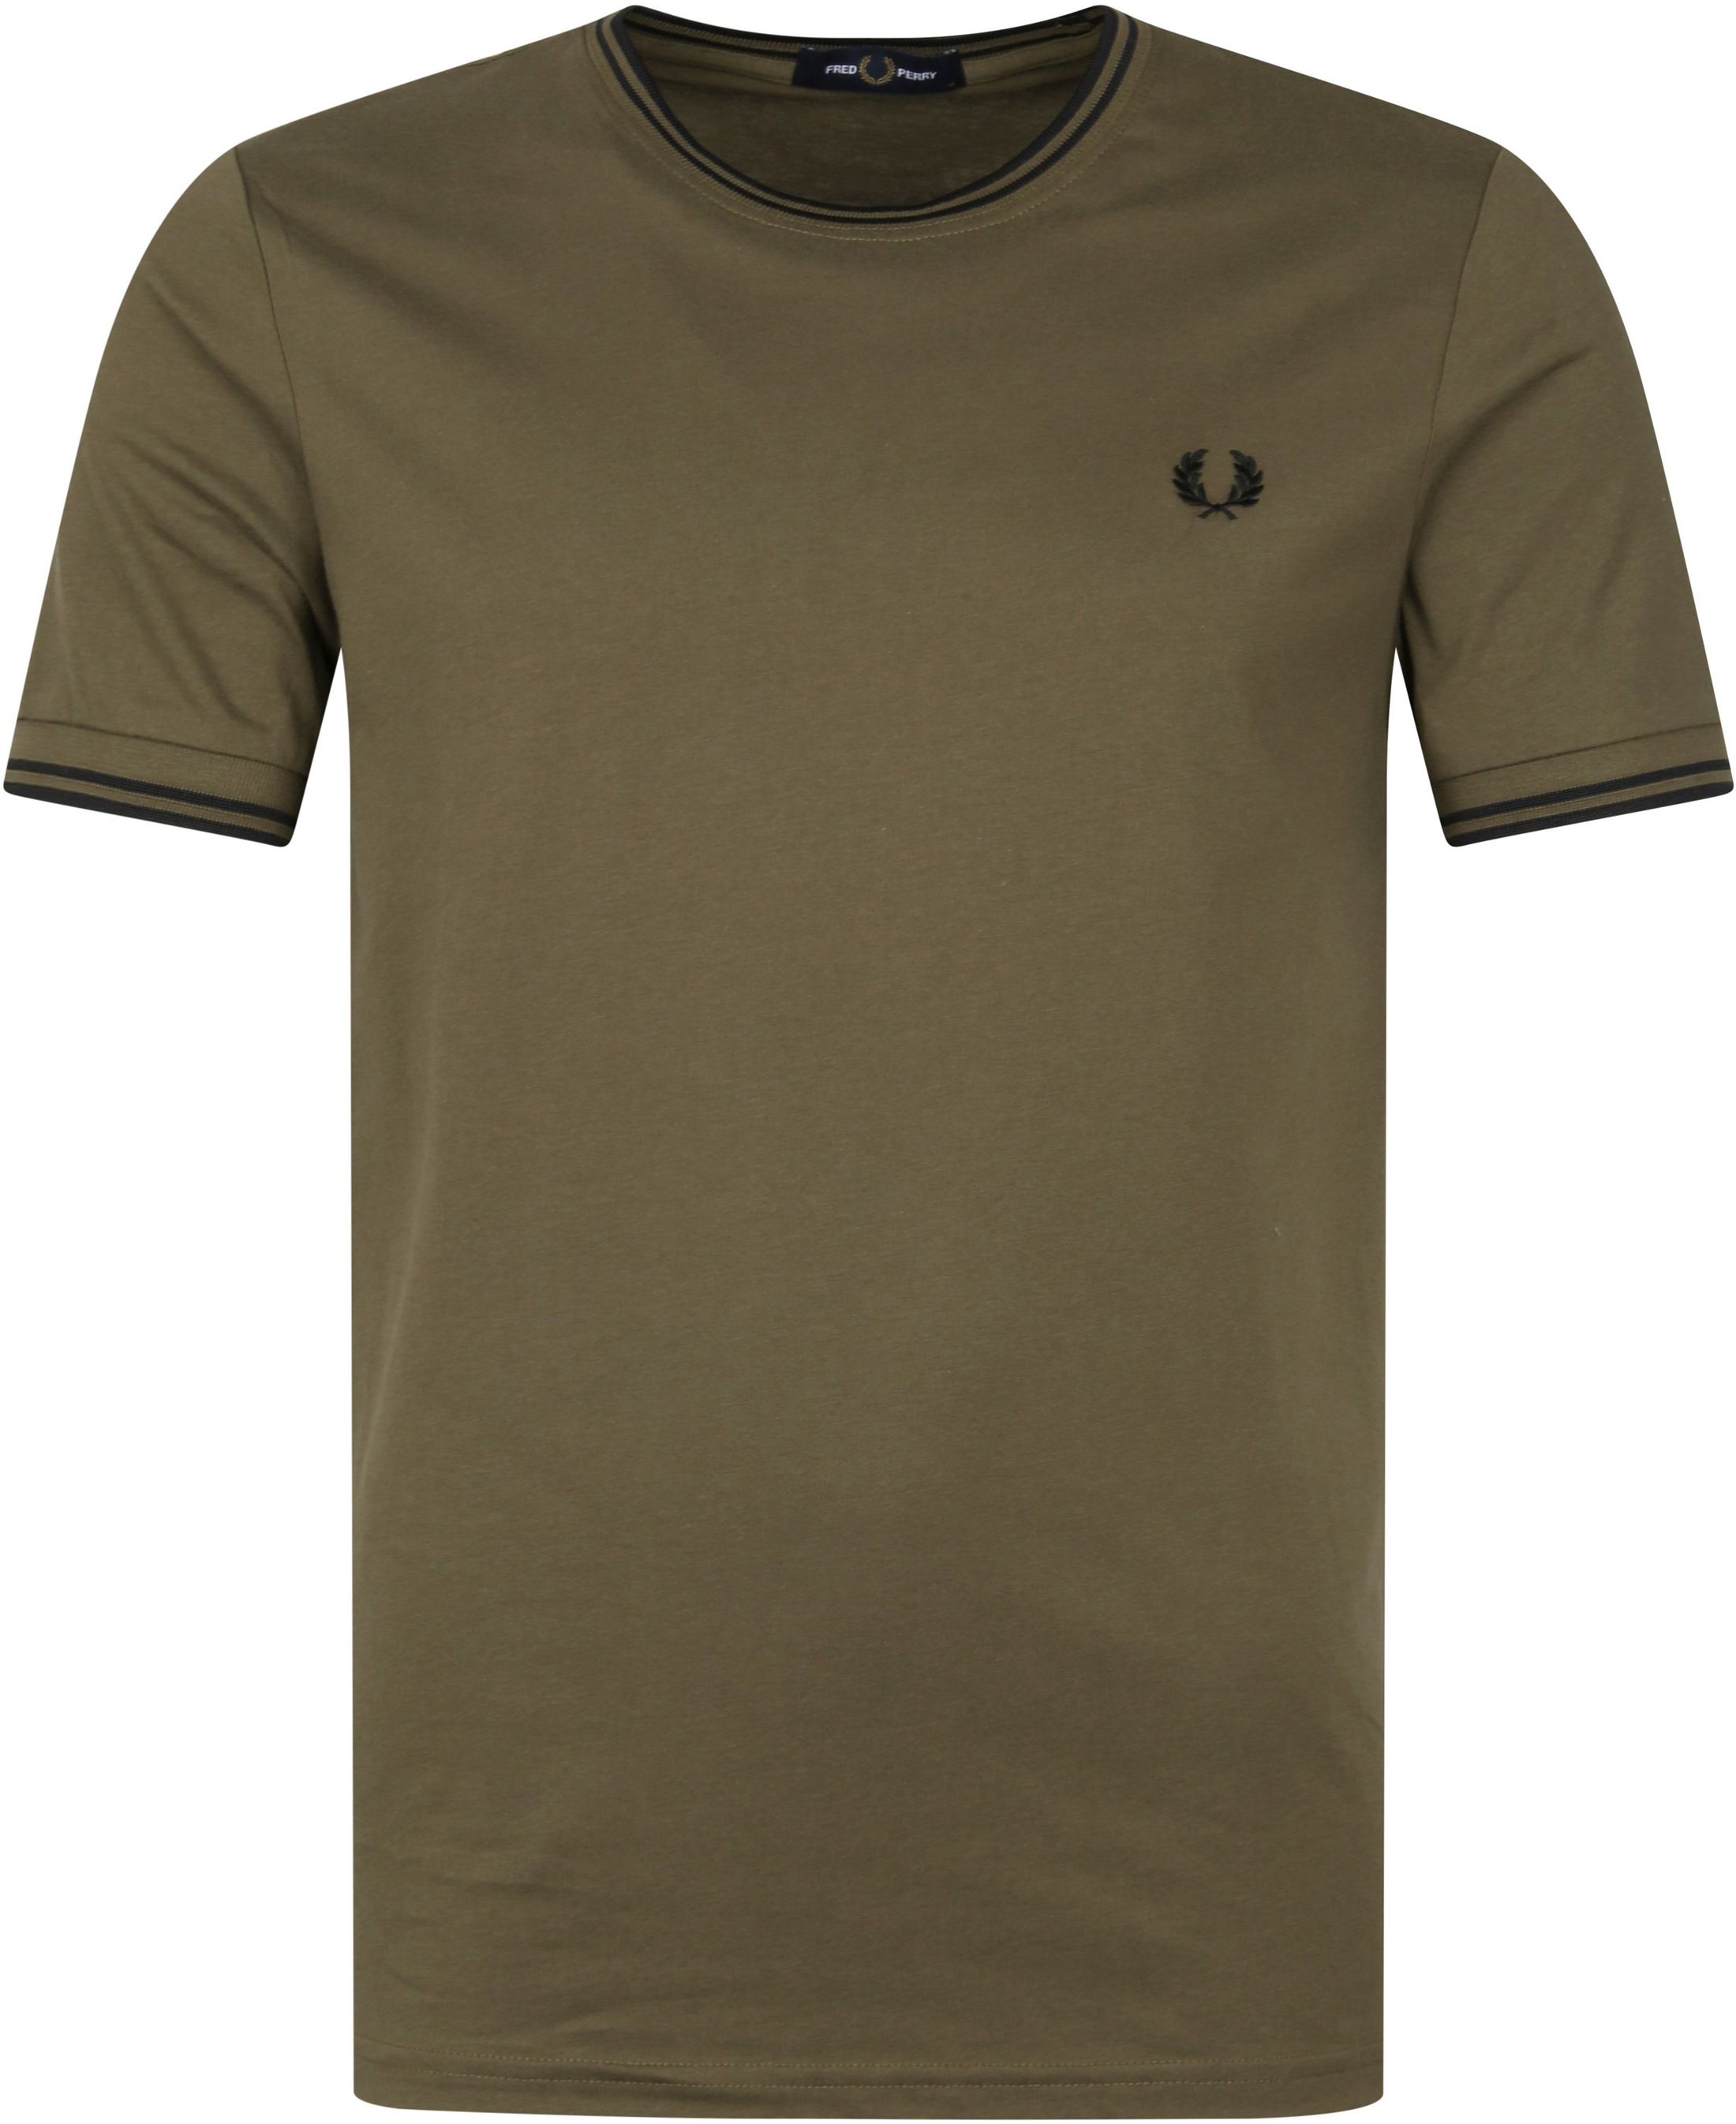 Fred Perry T-shirt M1588 Olive Green Dark Green size L